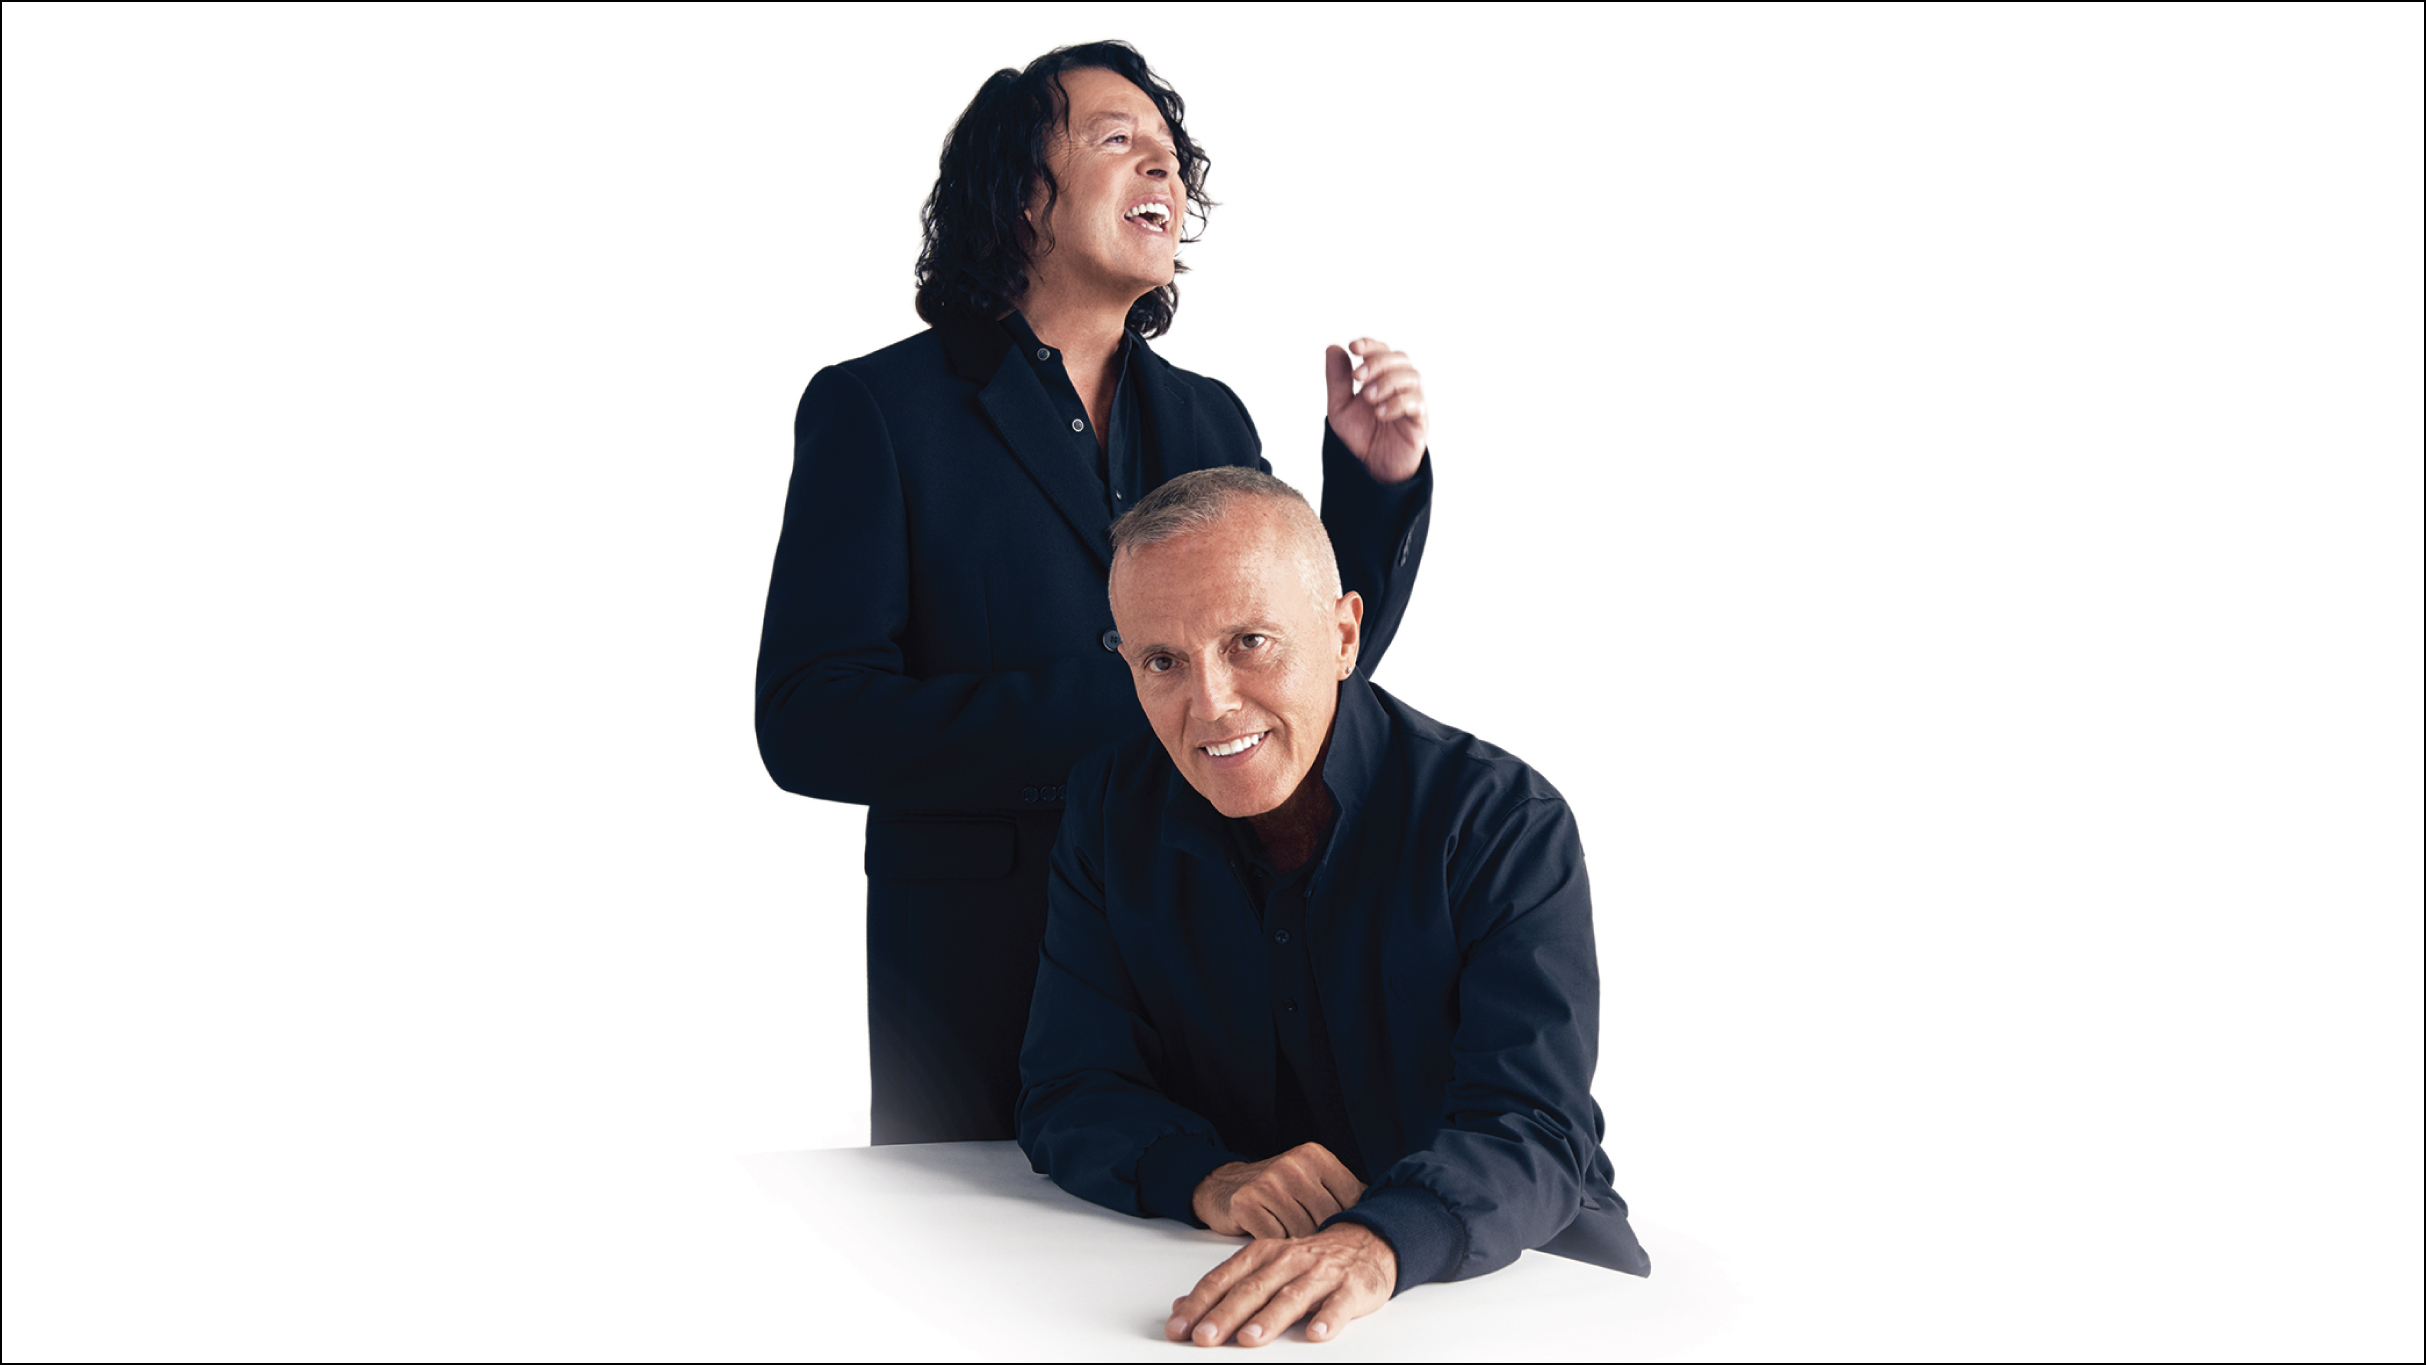 Tears for Fears bring their Rule The World show to the INEC Killarney on January 30th 2018